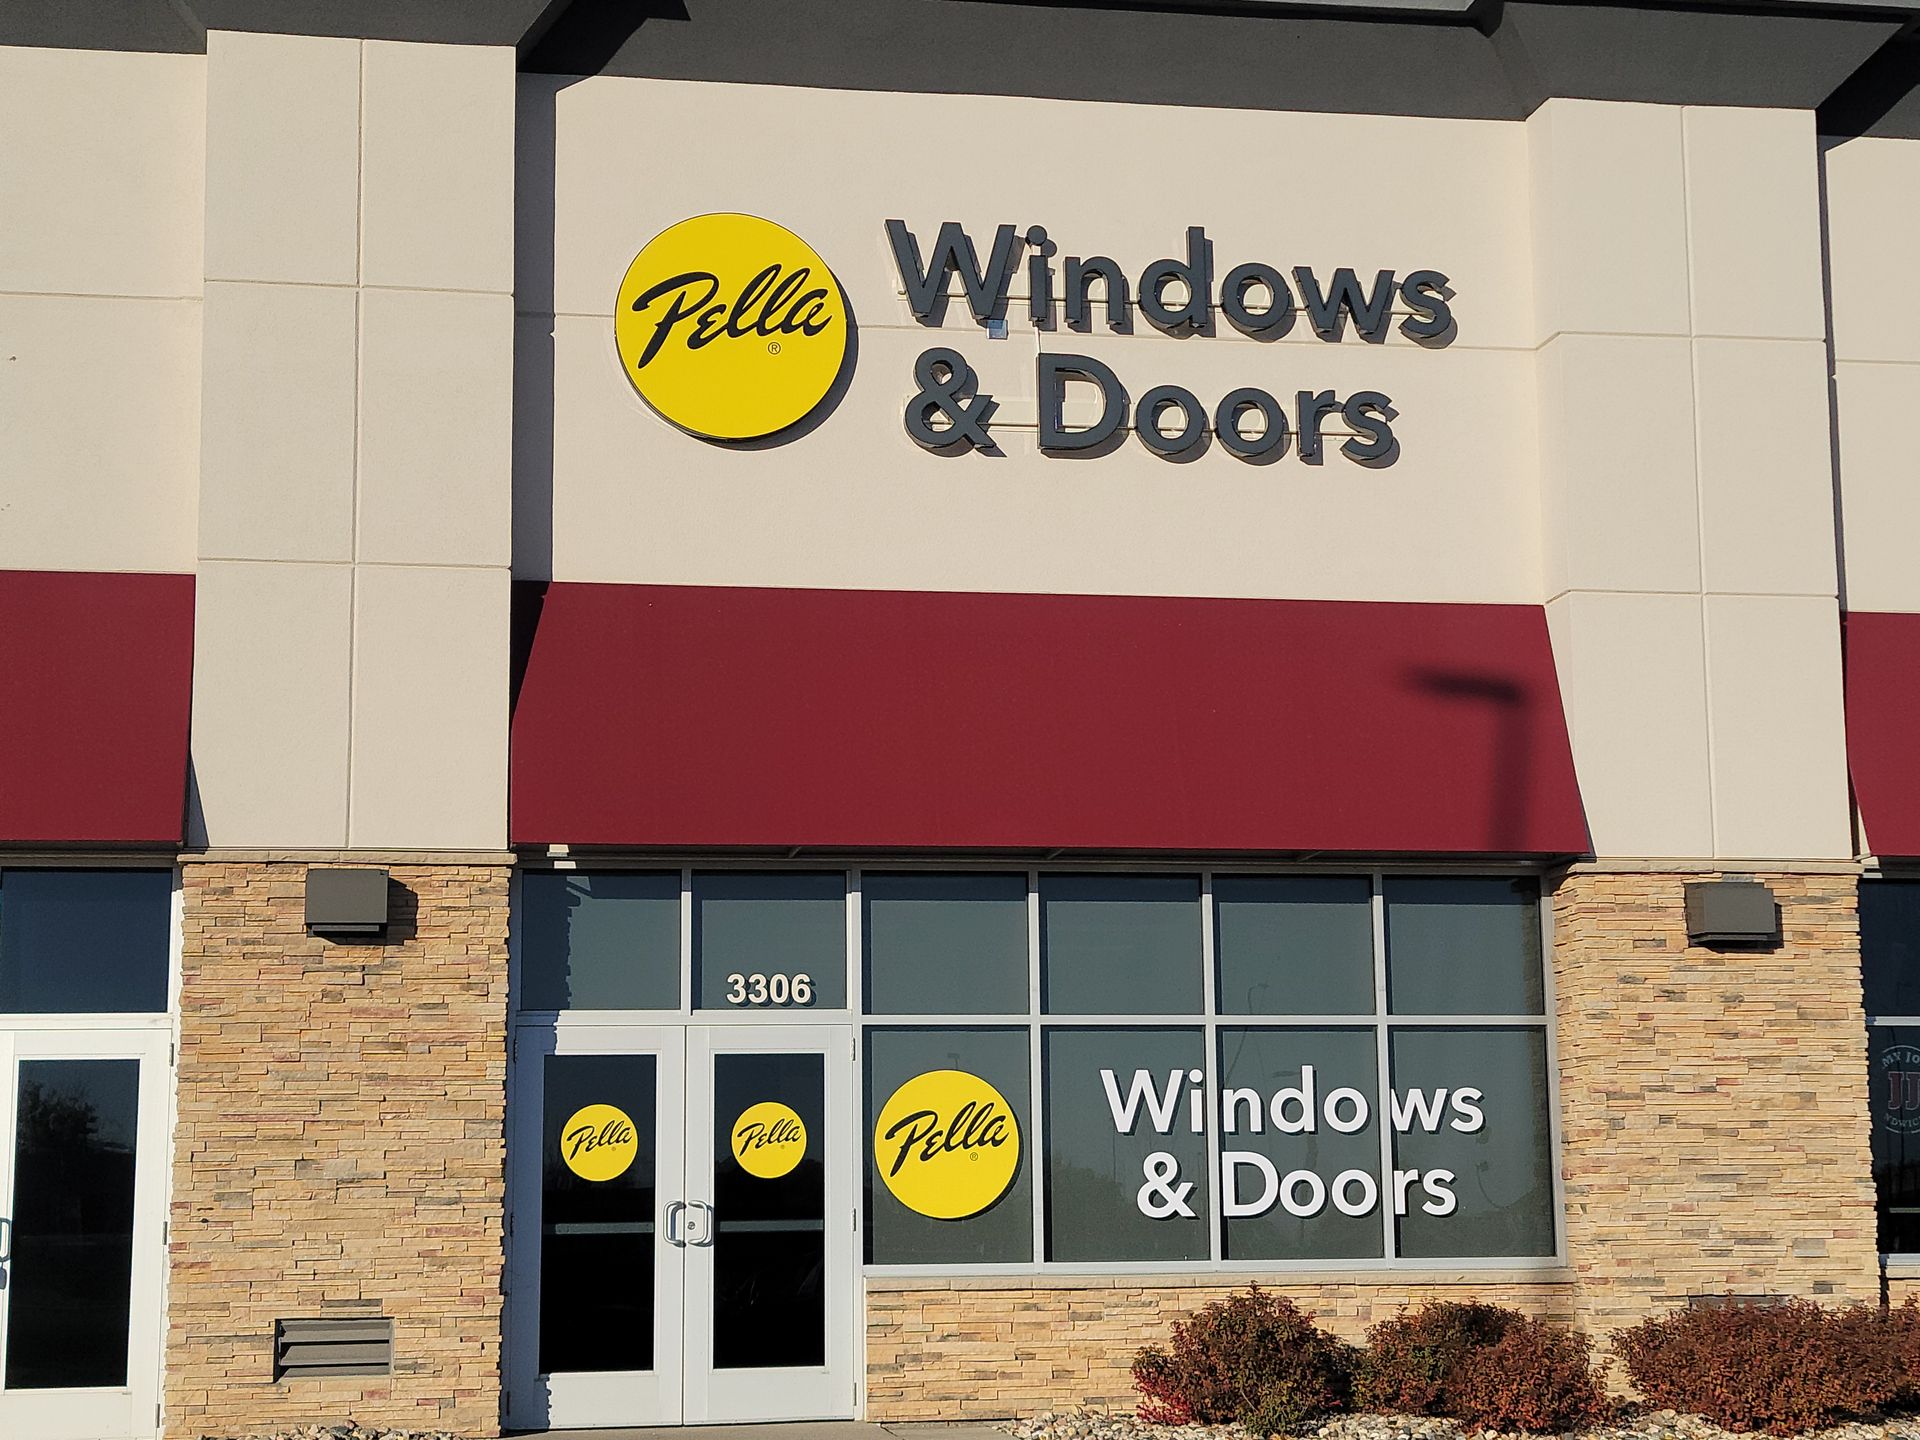 A store front for felix 's windows and doors